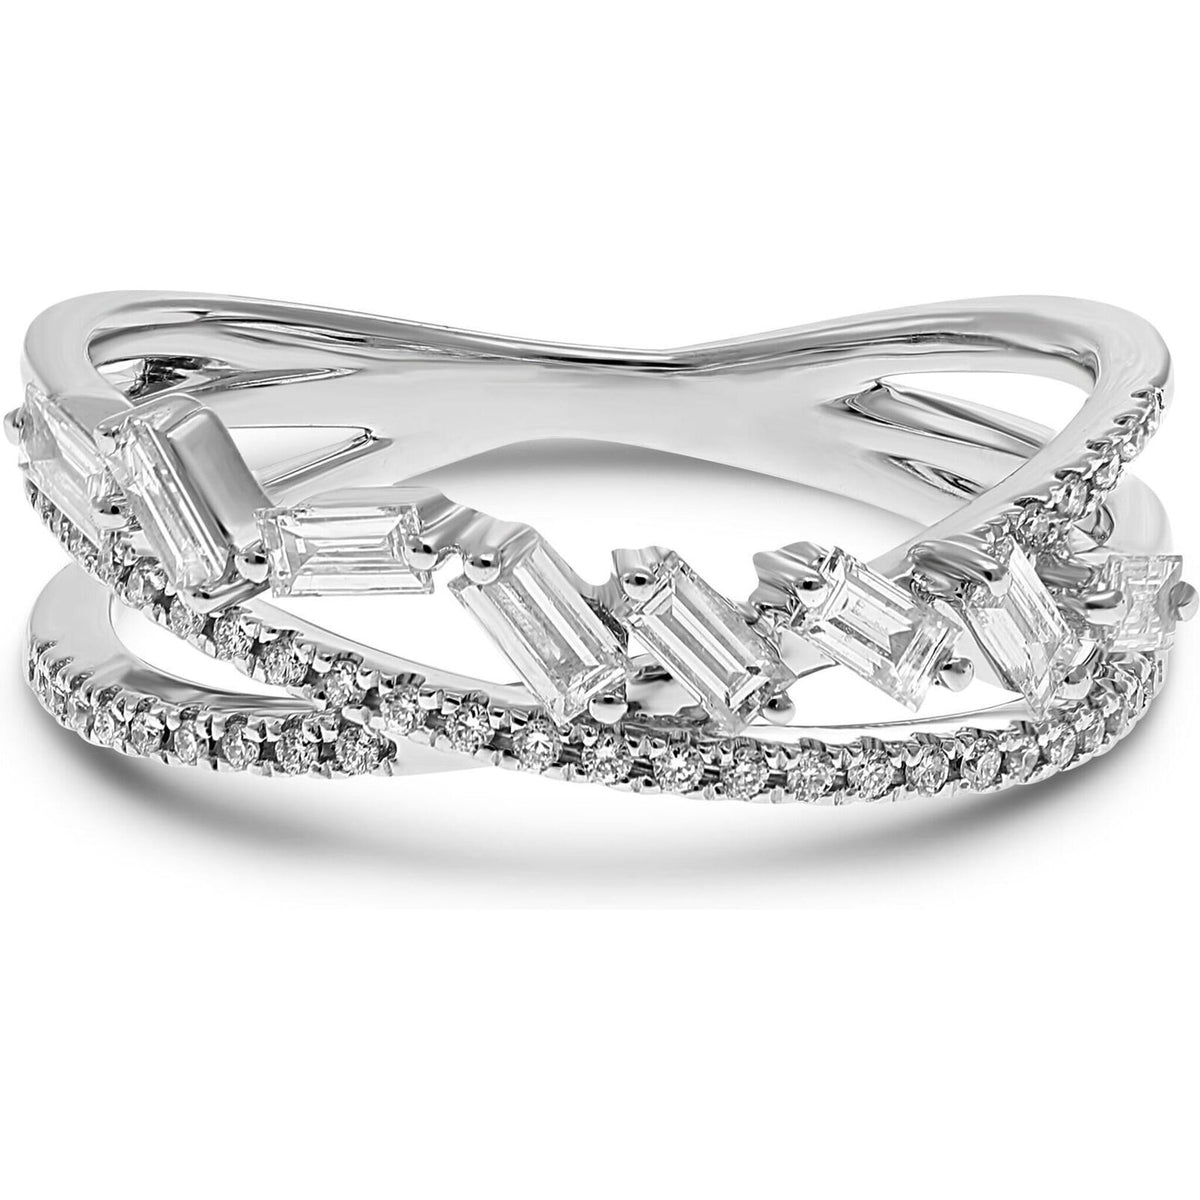 Elegant Baguette and Round Diamond Fashion Ring by Roman Jules